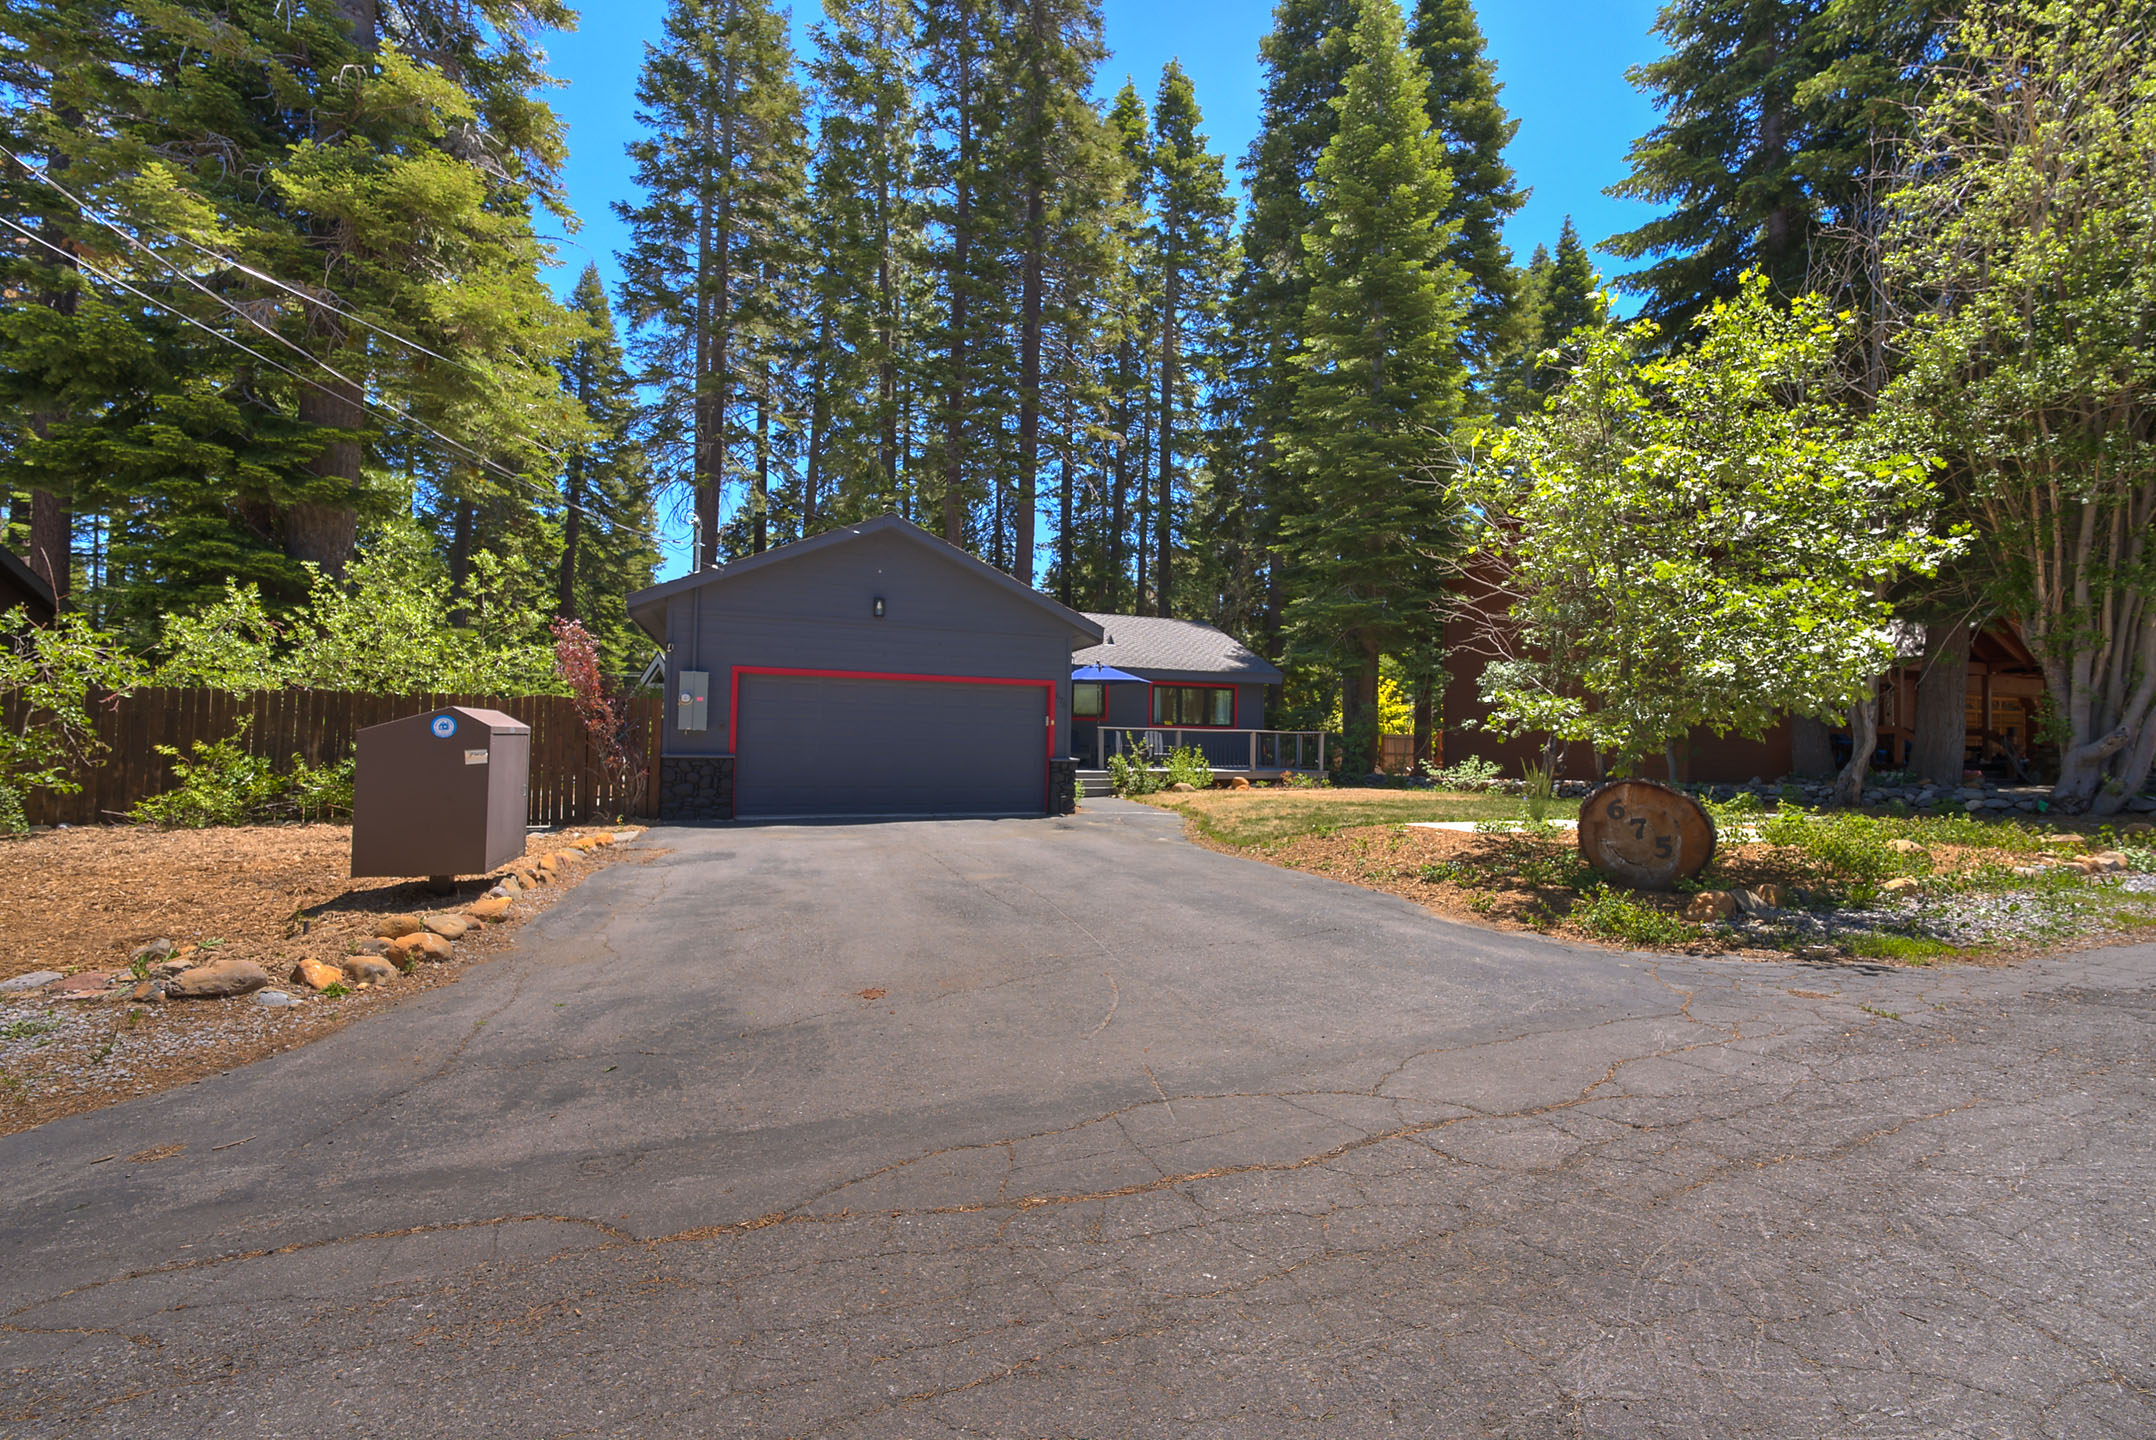 Tahoe City Modern Mountain Cabin front view4